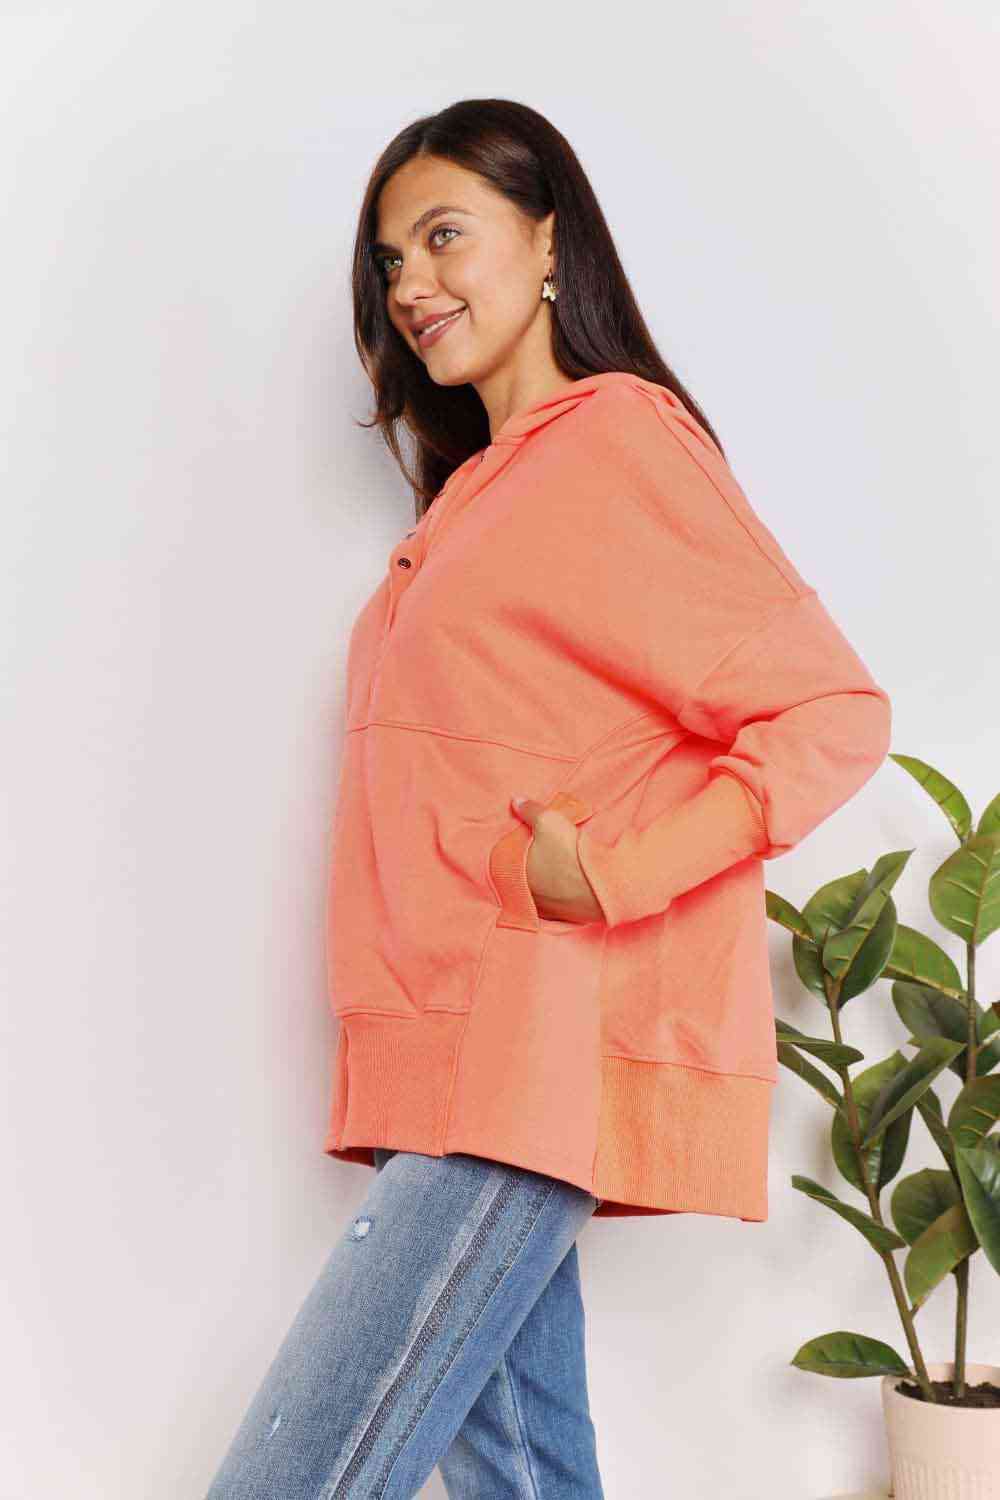 Womens Orange Quarter Snap Button Up Dropped Shoulder Hoodie Tunic